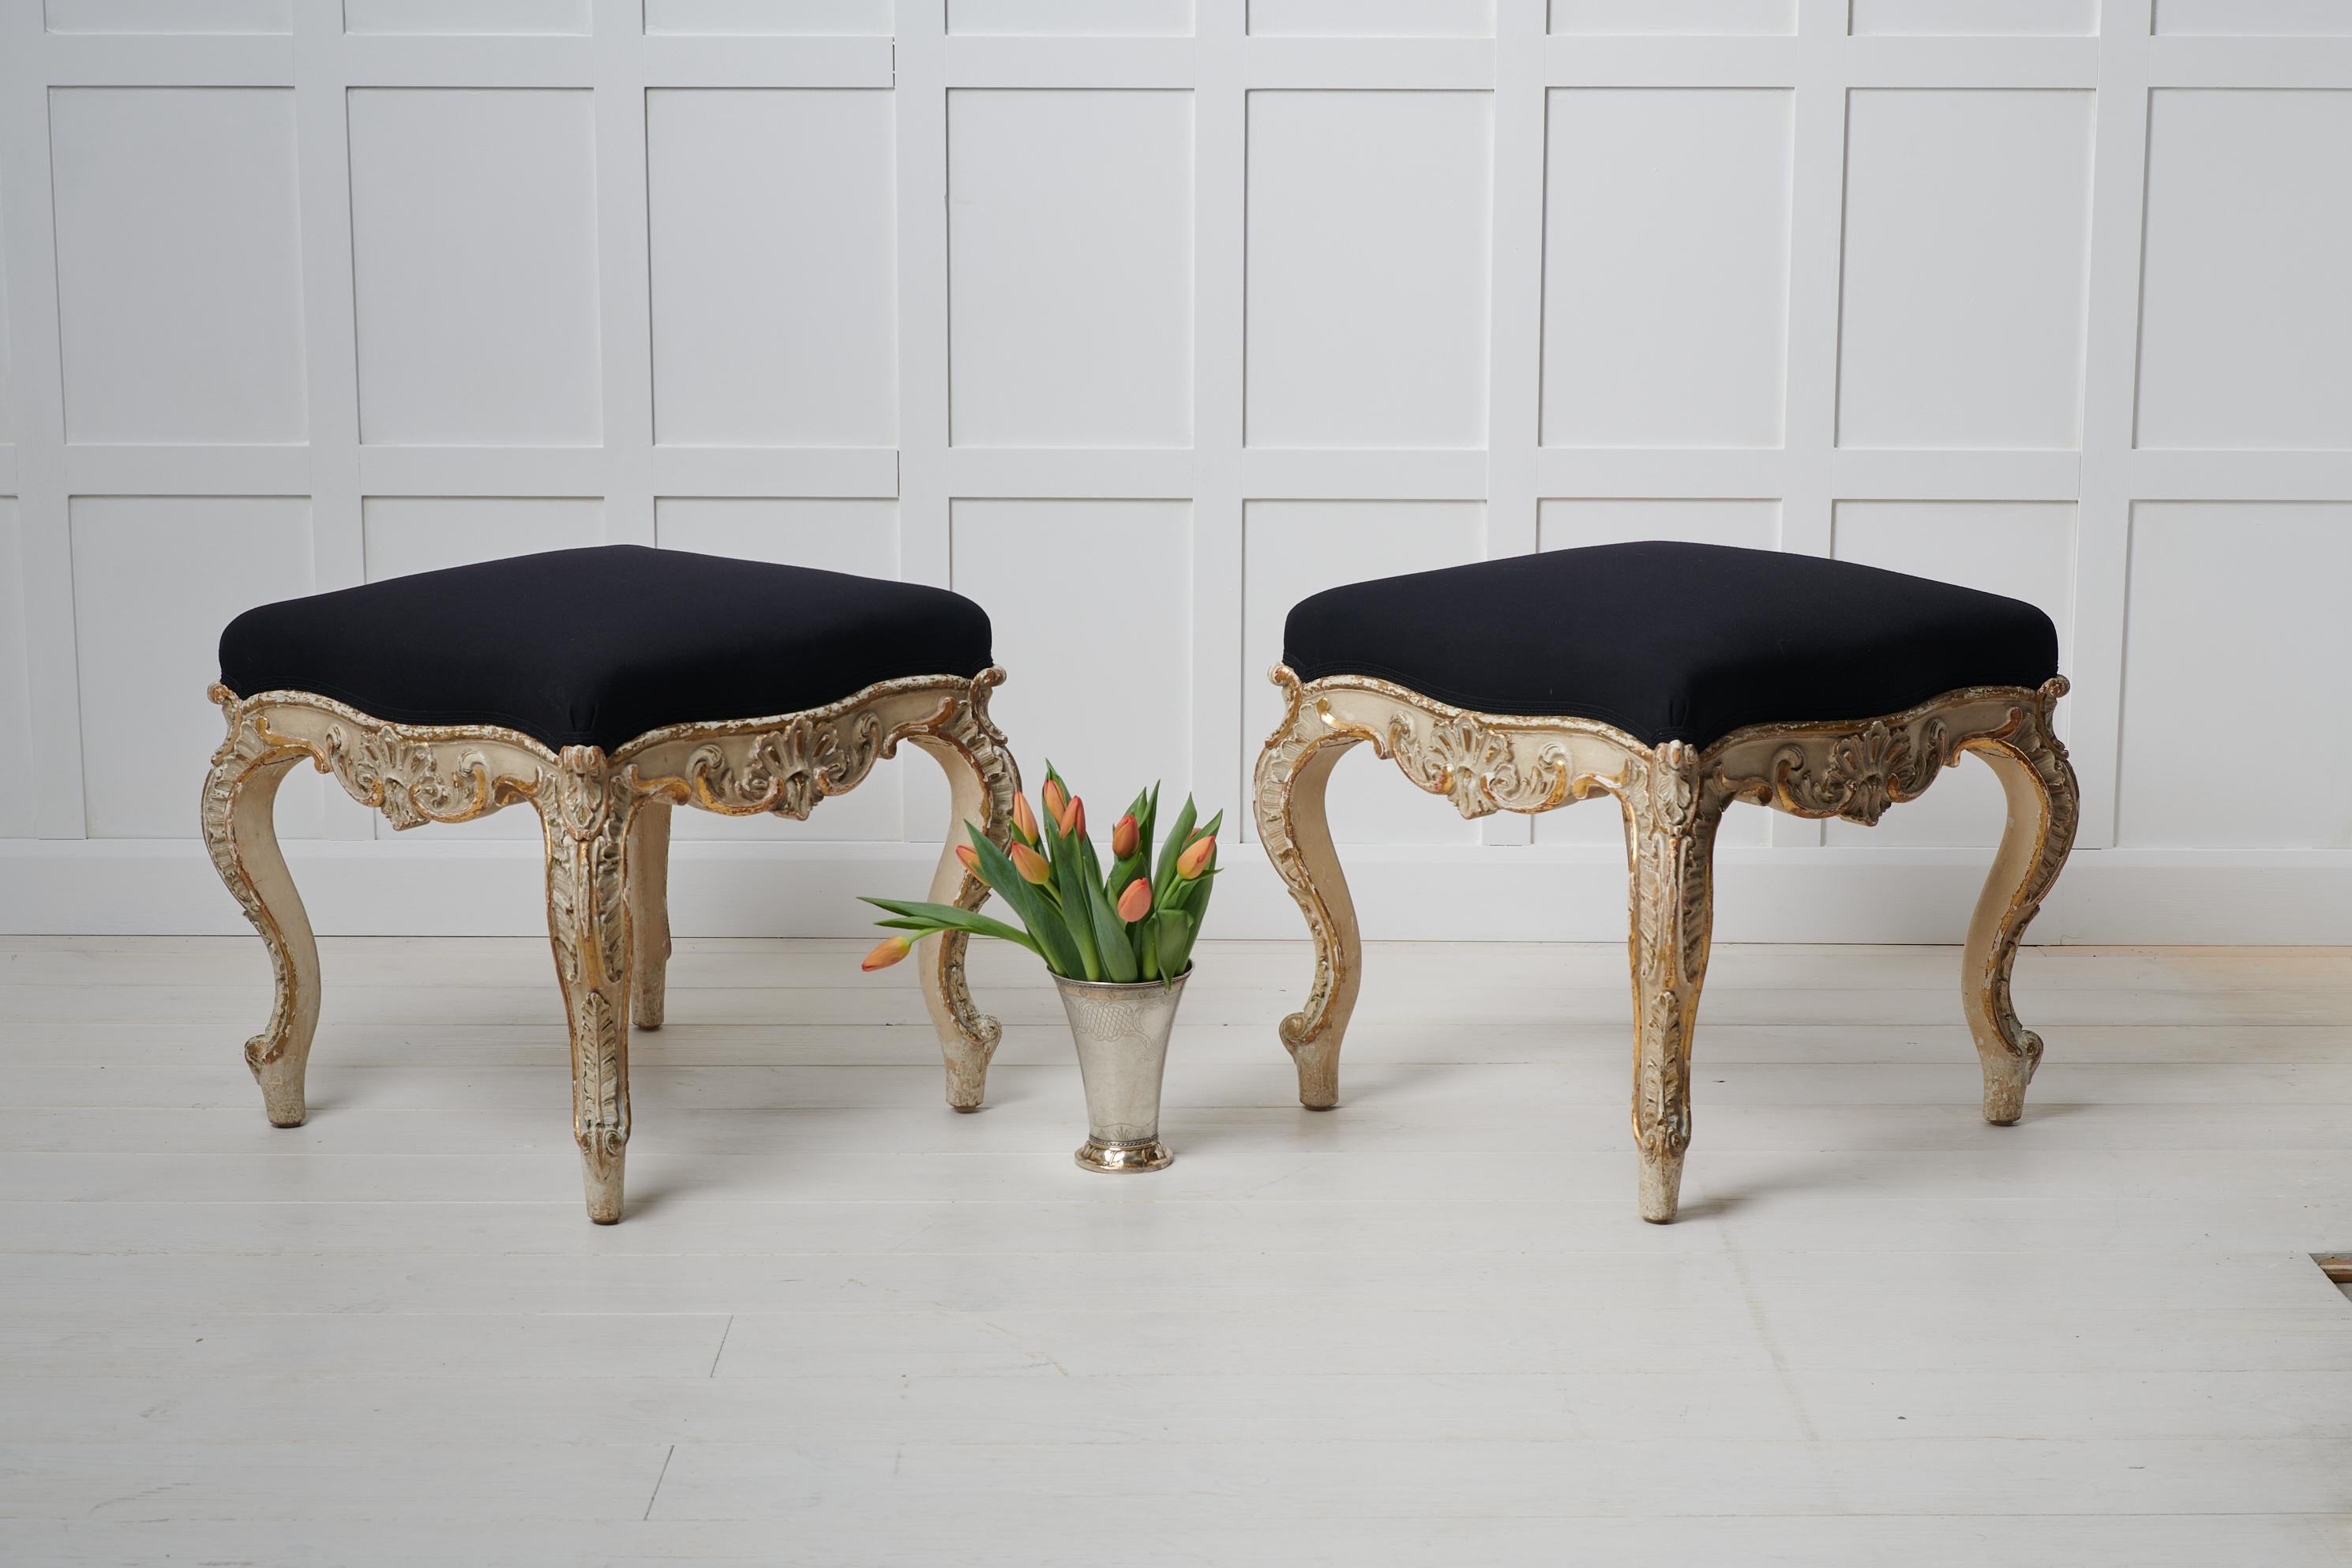 Pair of large upholstered stools in rococo style made during the rococo revival in the late 19th century. The stools are unusually large and have a frame in pine with old historic paint which has become distressed with time giving it a unique and